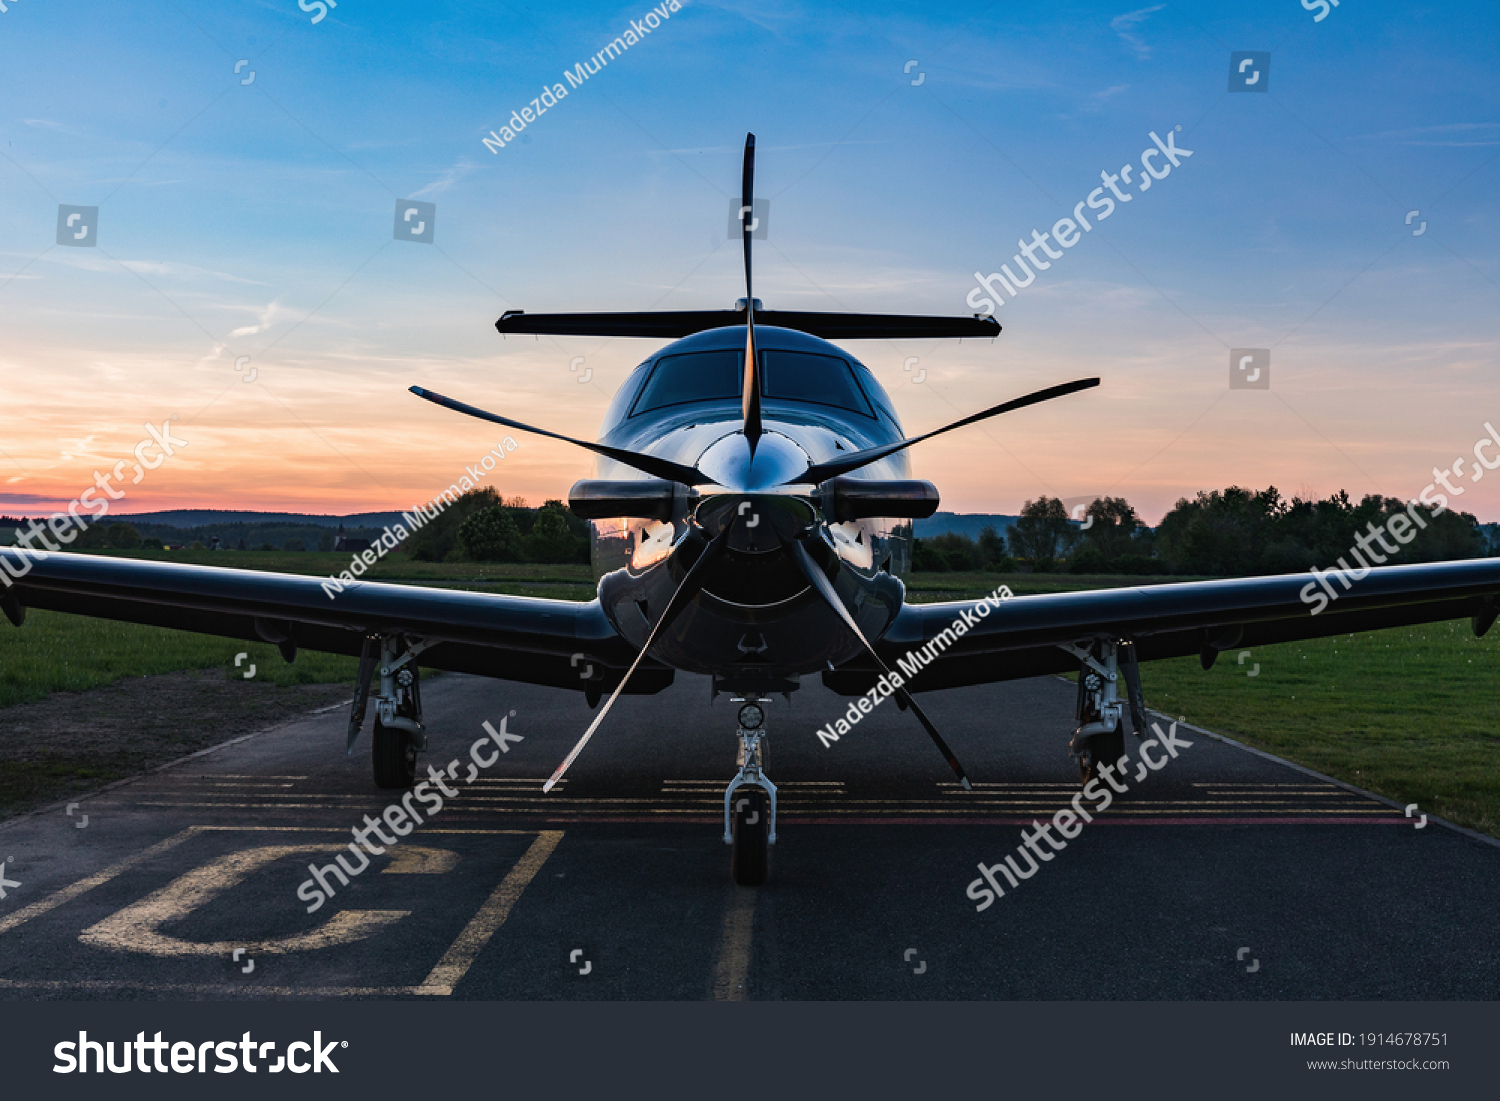 Single turboprop aircraft on evening runway after sunset. A single-engine plane is parked on the runway, bathed in the evening sun. Beautiful color view of the plane. #1914678751